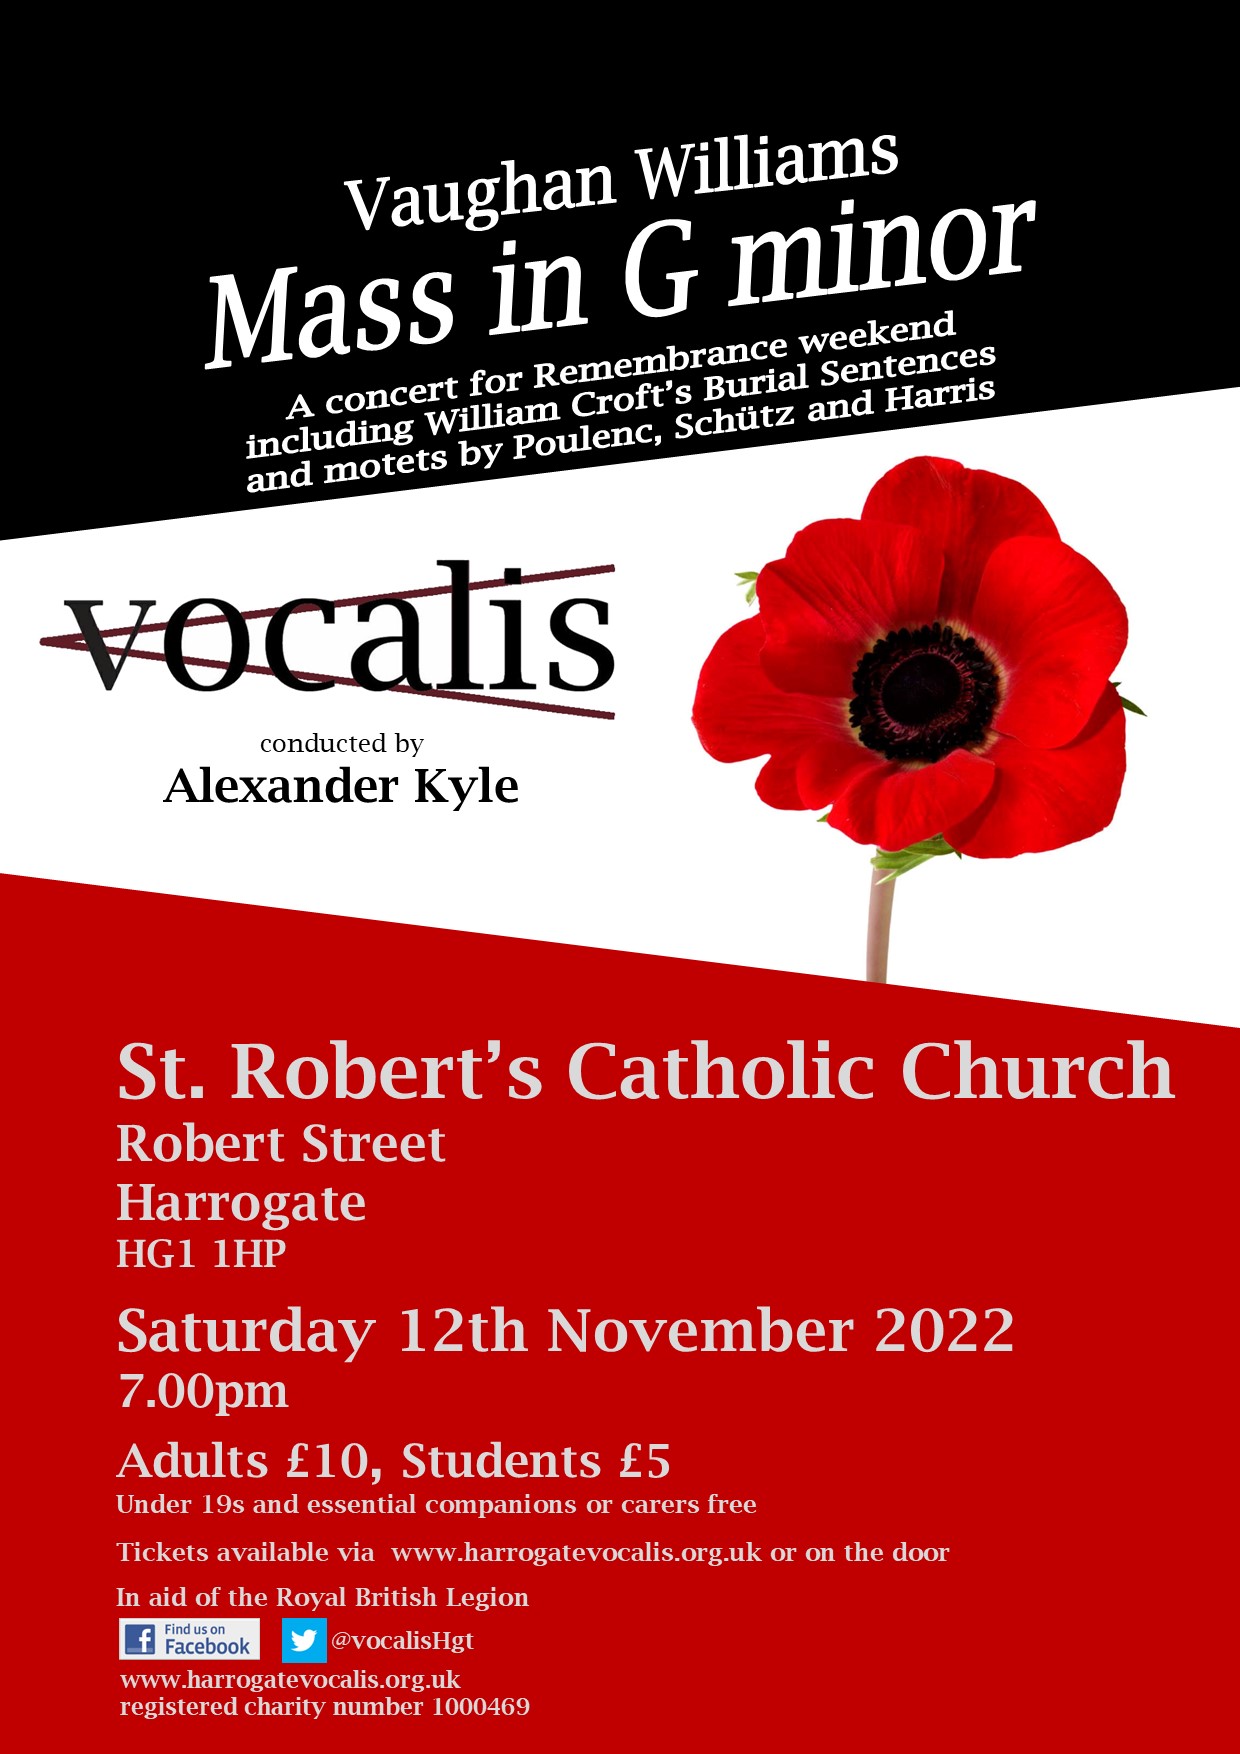 A concert for Remembrance Weekend - Vaughan Williams Mass in G Minor